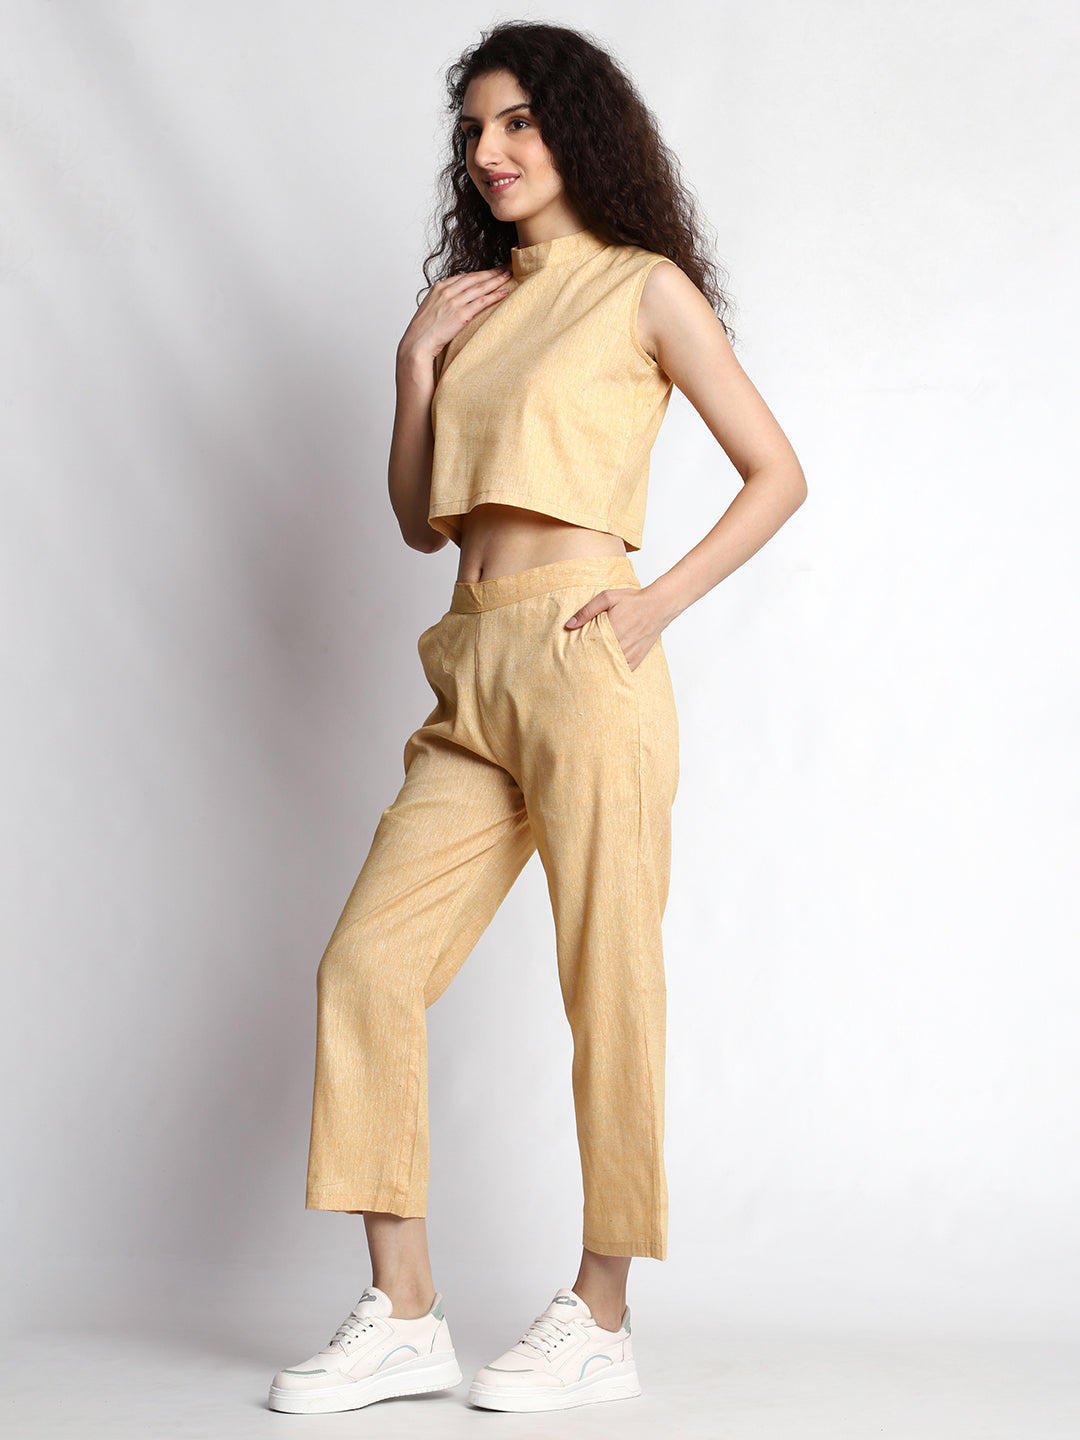 Plus Size Yellow Chic Sleeveless Crop Top Co-ord Set